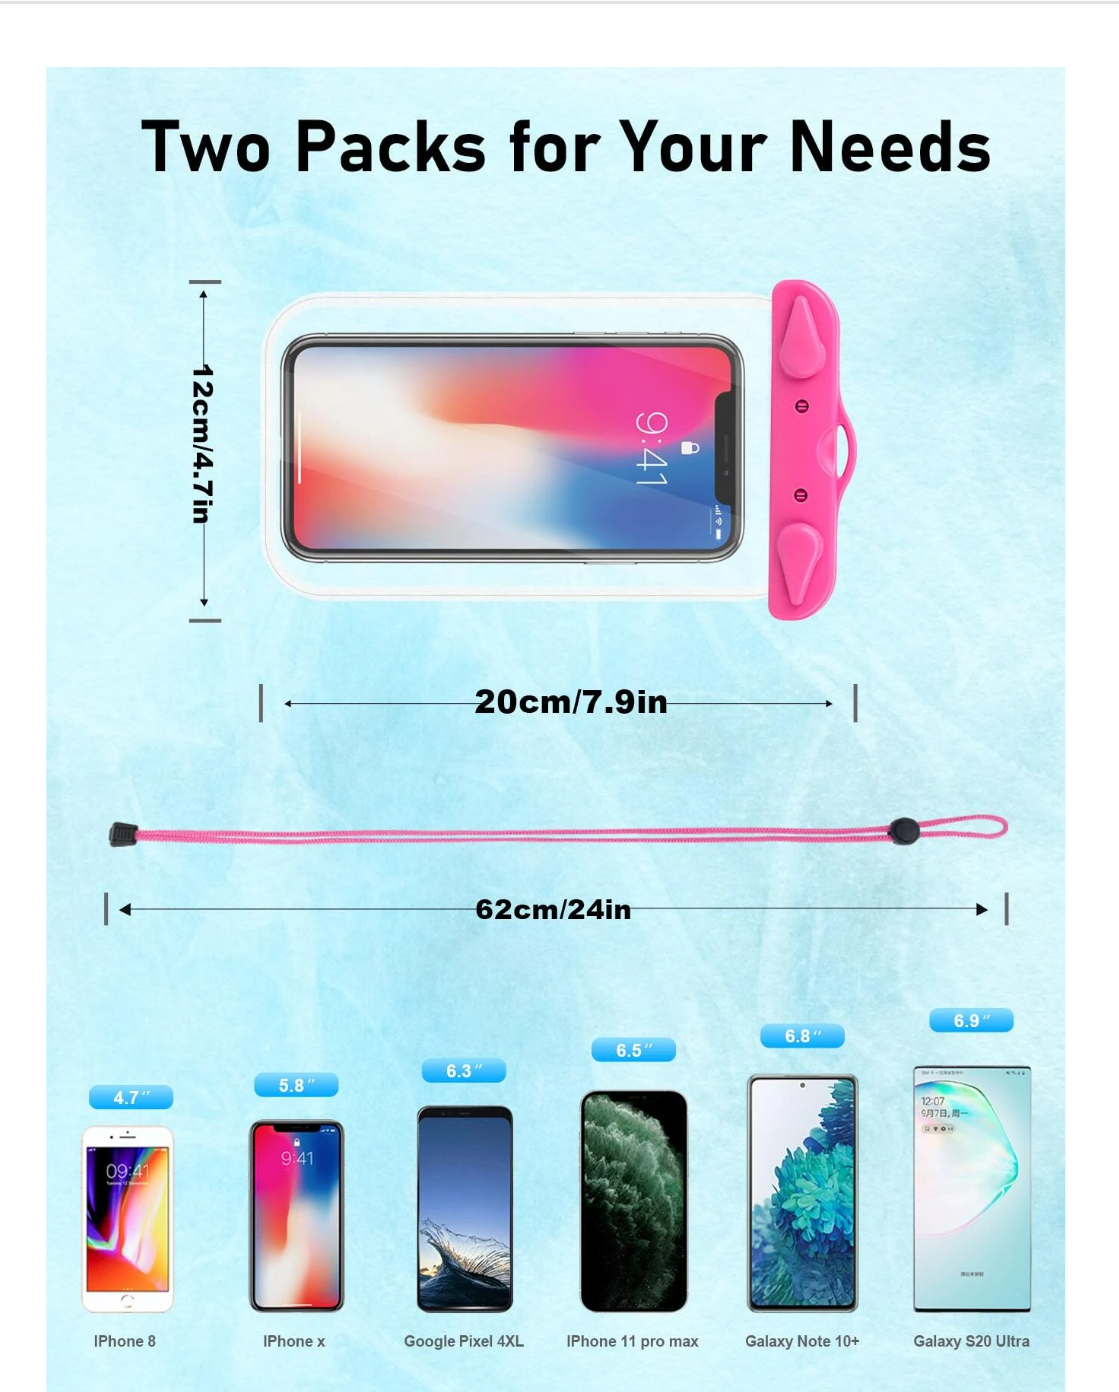 Aquashield Duo: 2pcs Clear Waterproof Phone Bags with Stylish Lanyards – Dive into Ultimate Protection!